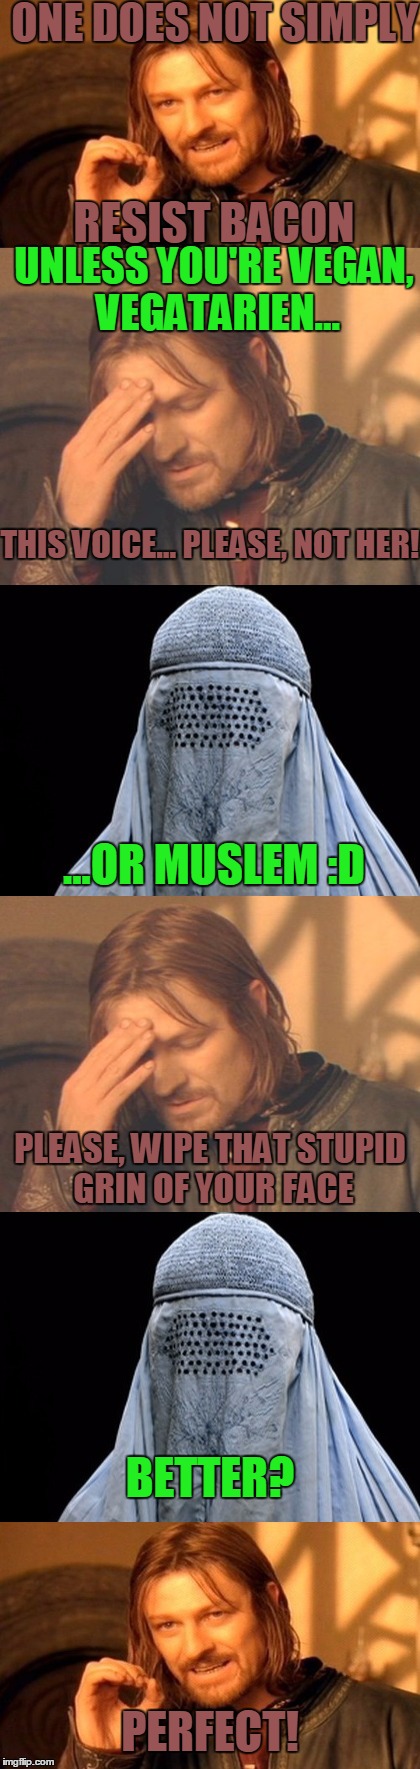 ONE DOES NOT SIMPLY; RESIST BACON; UNLESS YOU'RE VEGAN, VEGATARIEN... THIS VOICE... PLEASE, NOT HER! ...OR MUSLEM :D; PLEASE, WIPE THAT STUPID GRIN OF YOUR FACE; BETTER? PERFECT! | image tagged in memes,one does not simply,frustrated boromir,bad pun burka,bacon,vegan | made w/ Imgflip meme maker